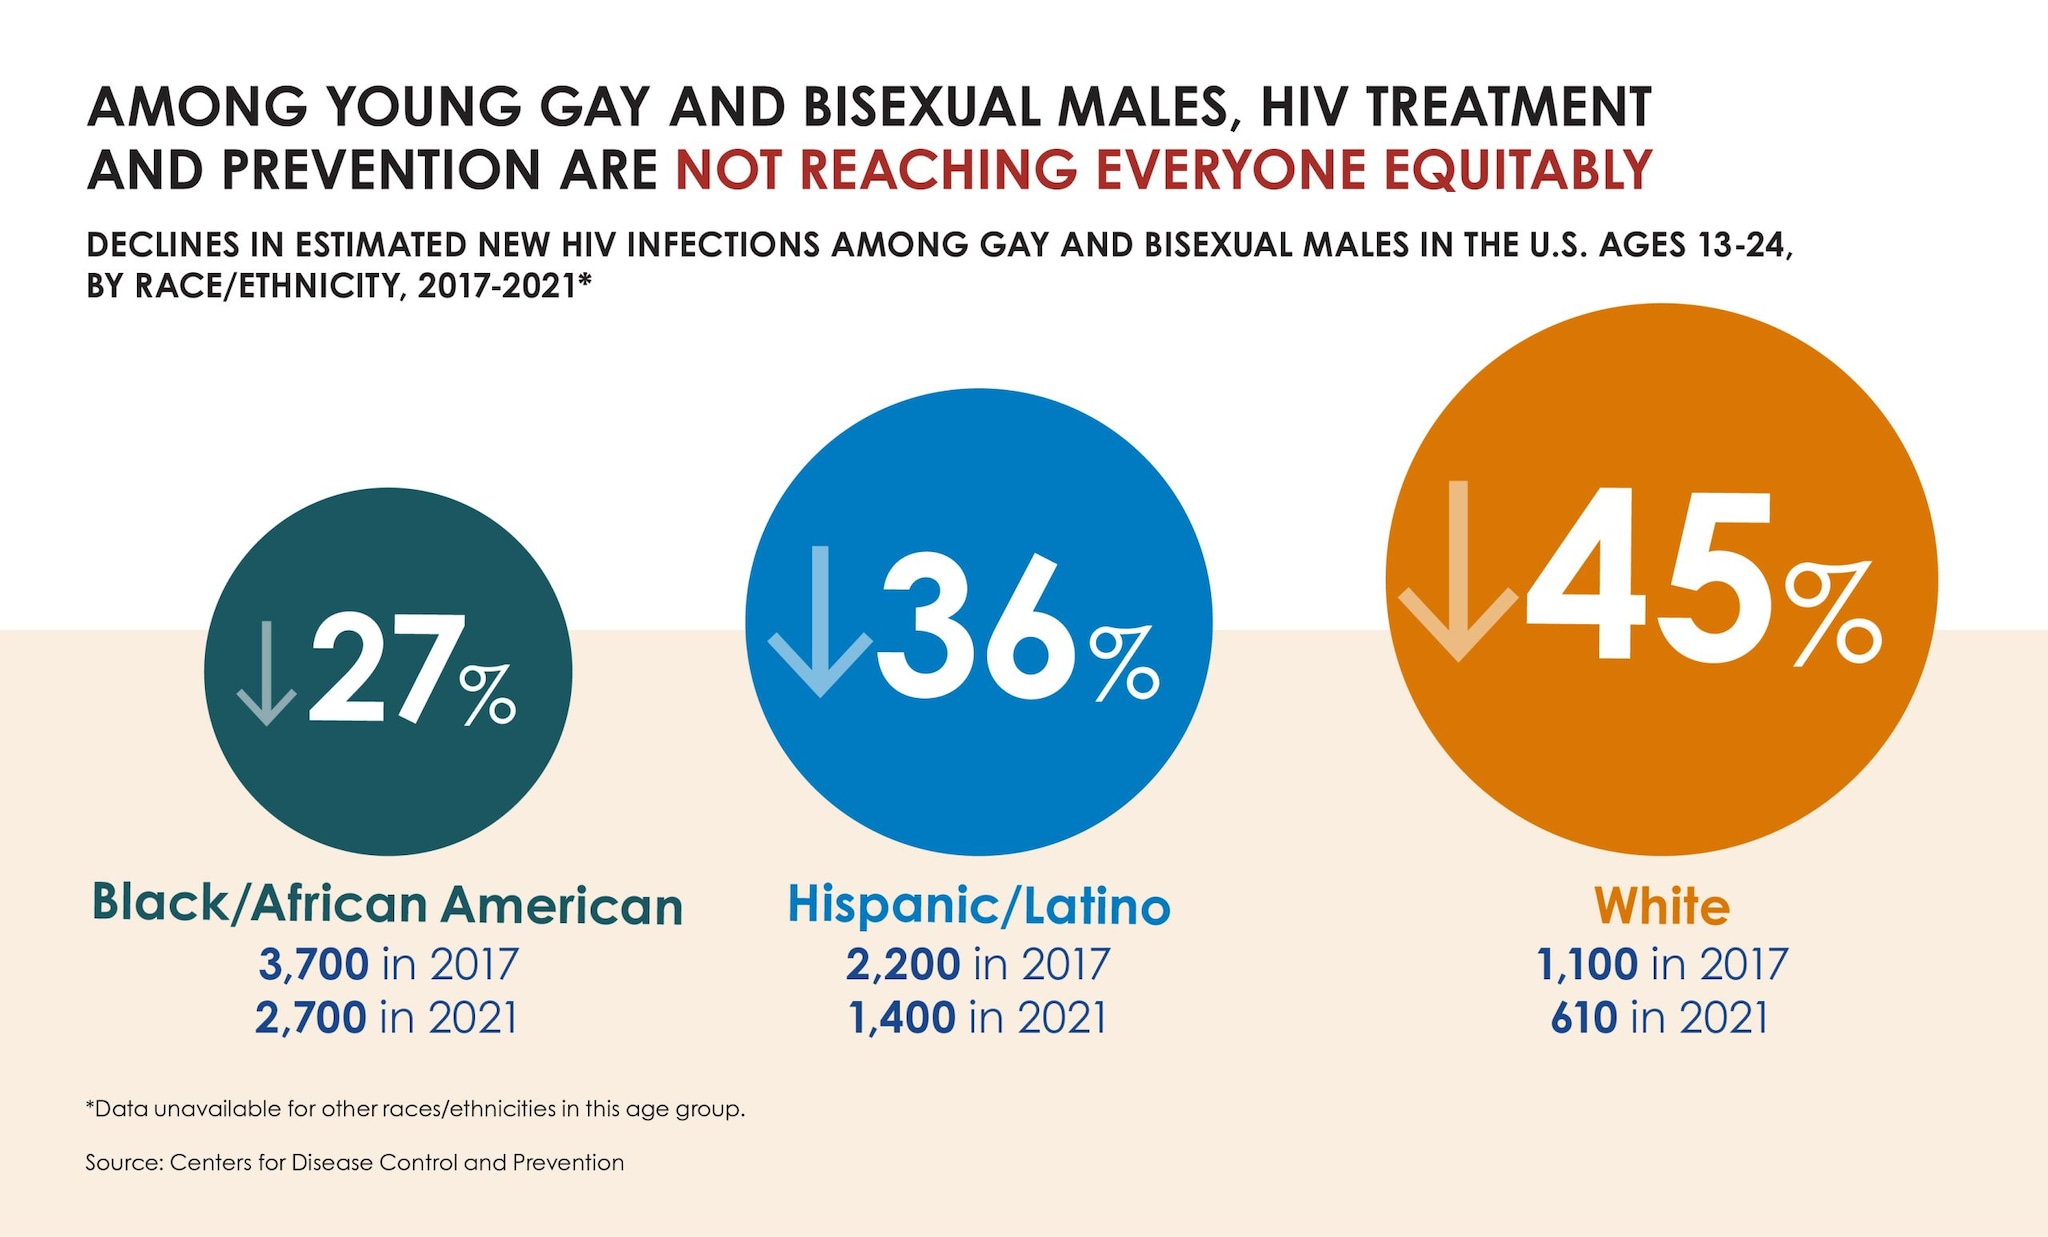 A graphic showing that estimated new HIV infections among gay and bisexual males in the U.S between 2017-2021 decreased by 45% among White people, 36% among Hispanic/Latino people, and 27% among Black people.